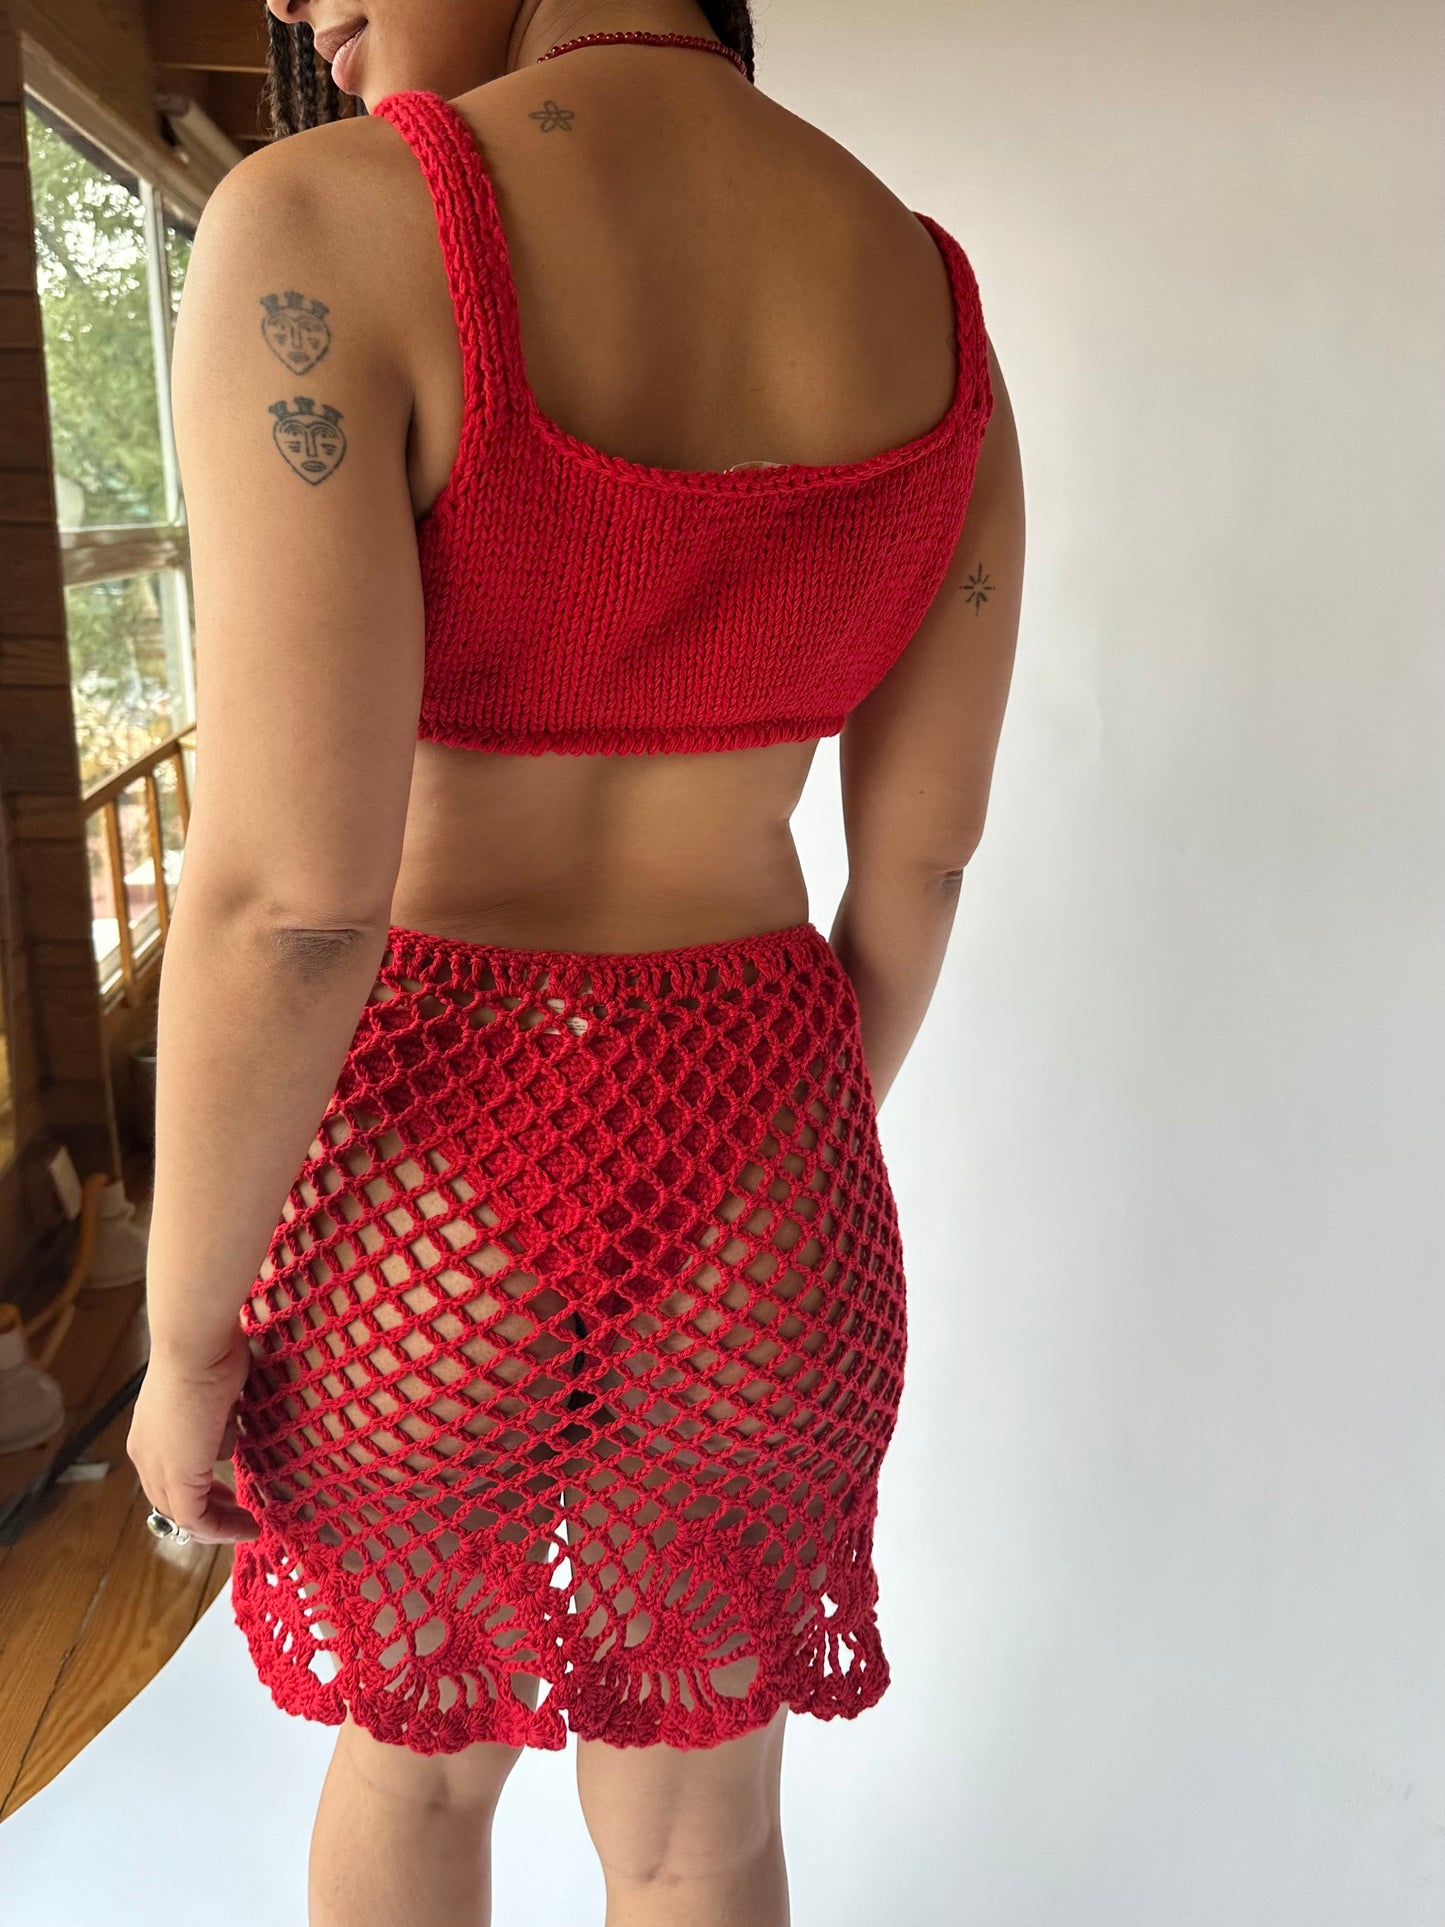 LUPE SKIRT / RED